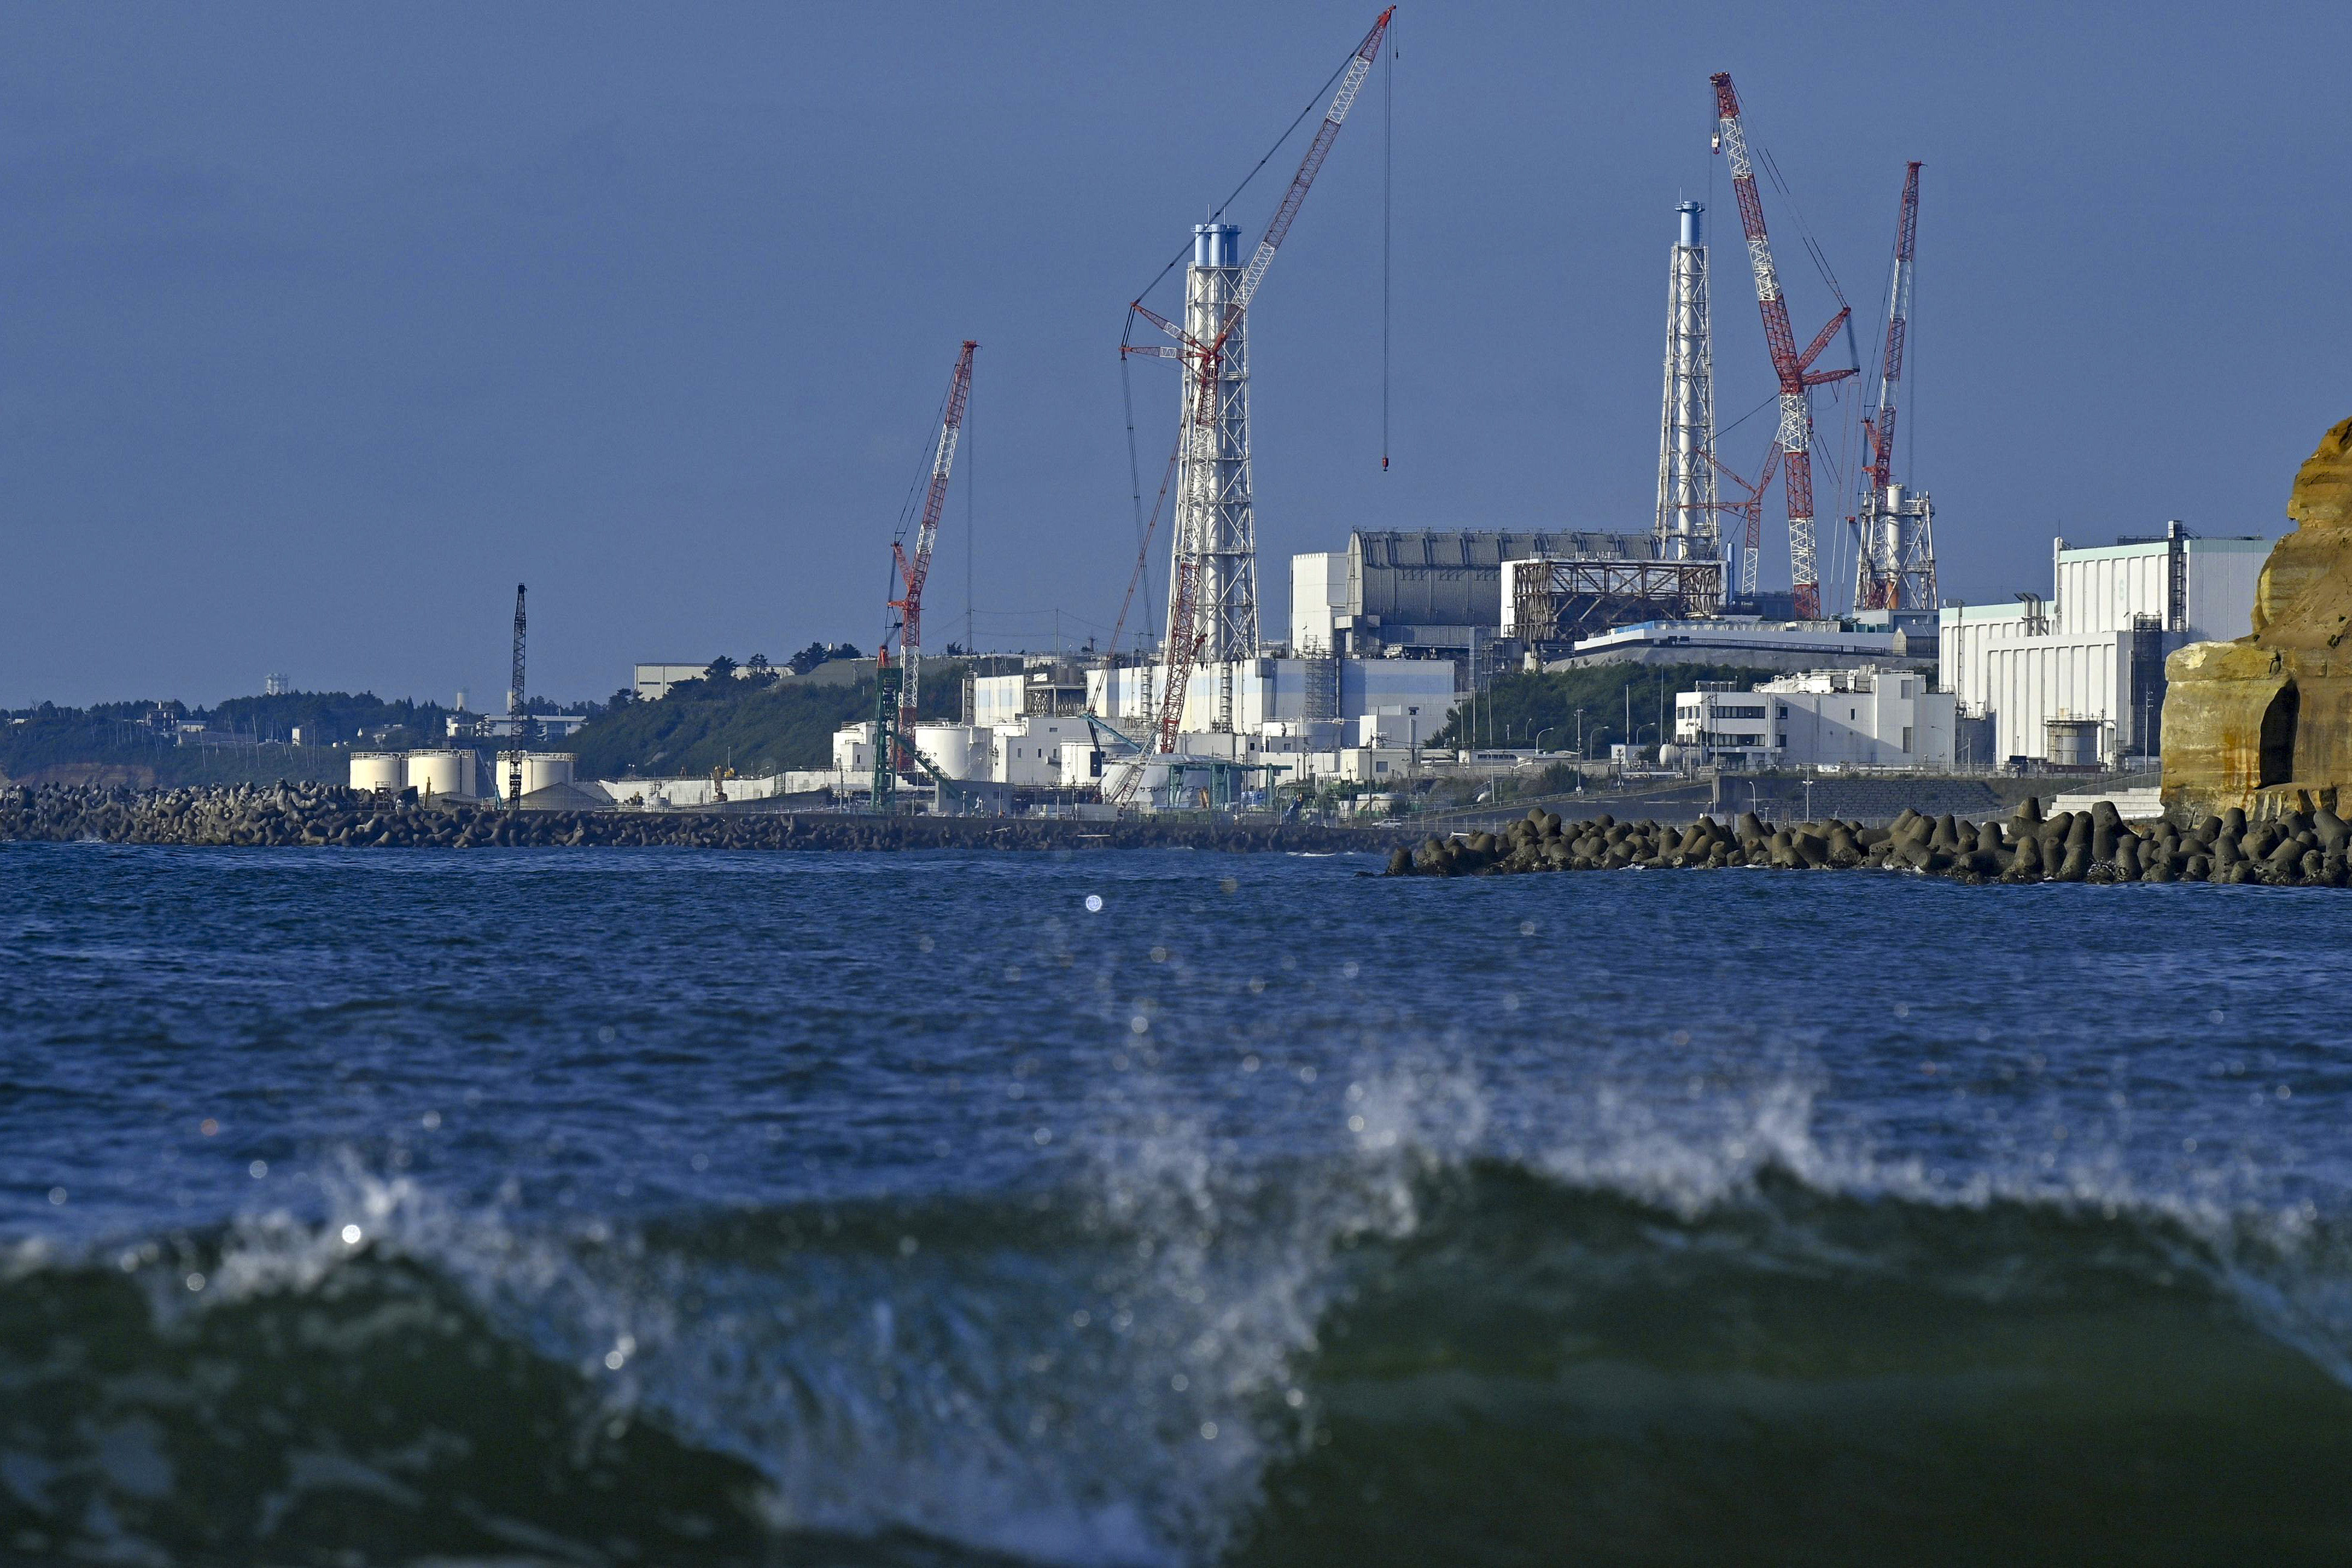 Treated water has been released from the Fukushima power plant in Japan. Photo: Kyodo